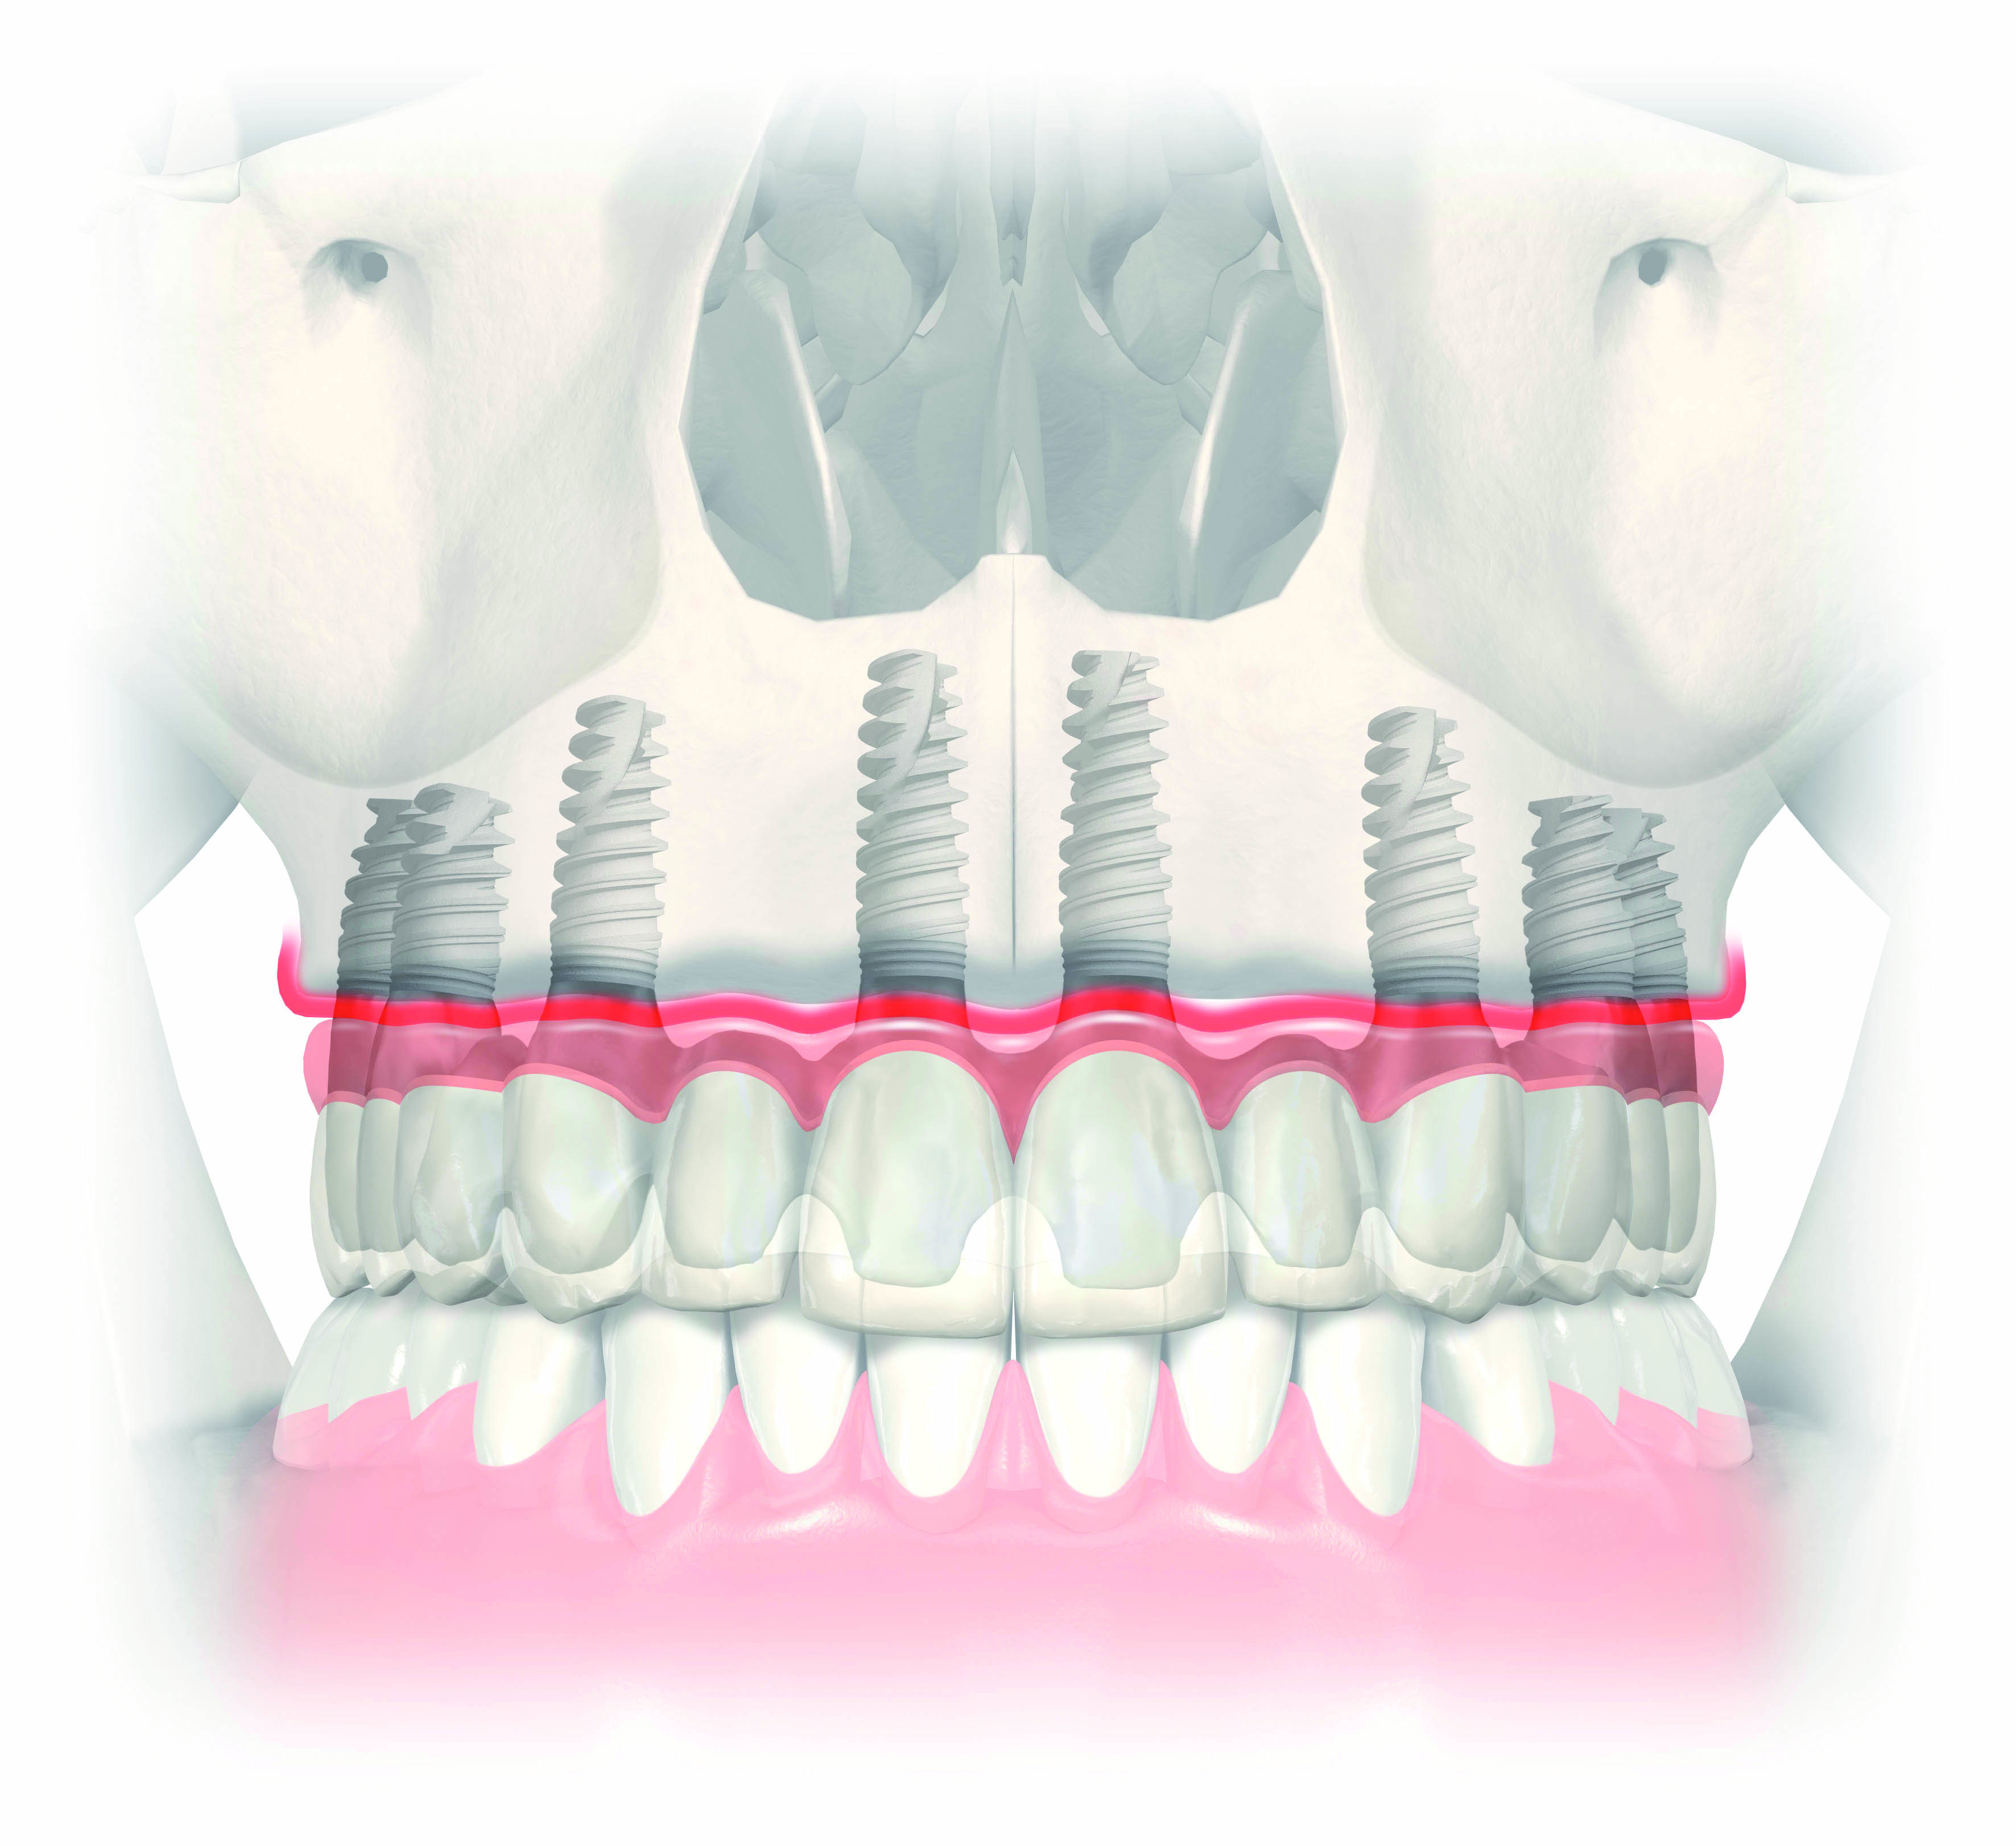 Permanent tooth reconstruction with a porcelain bridge on five or more implants